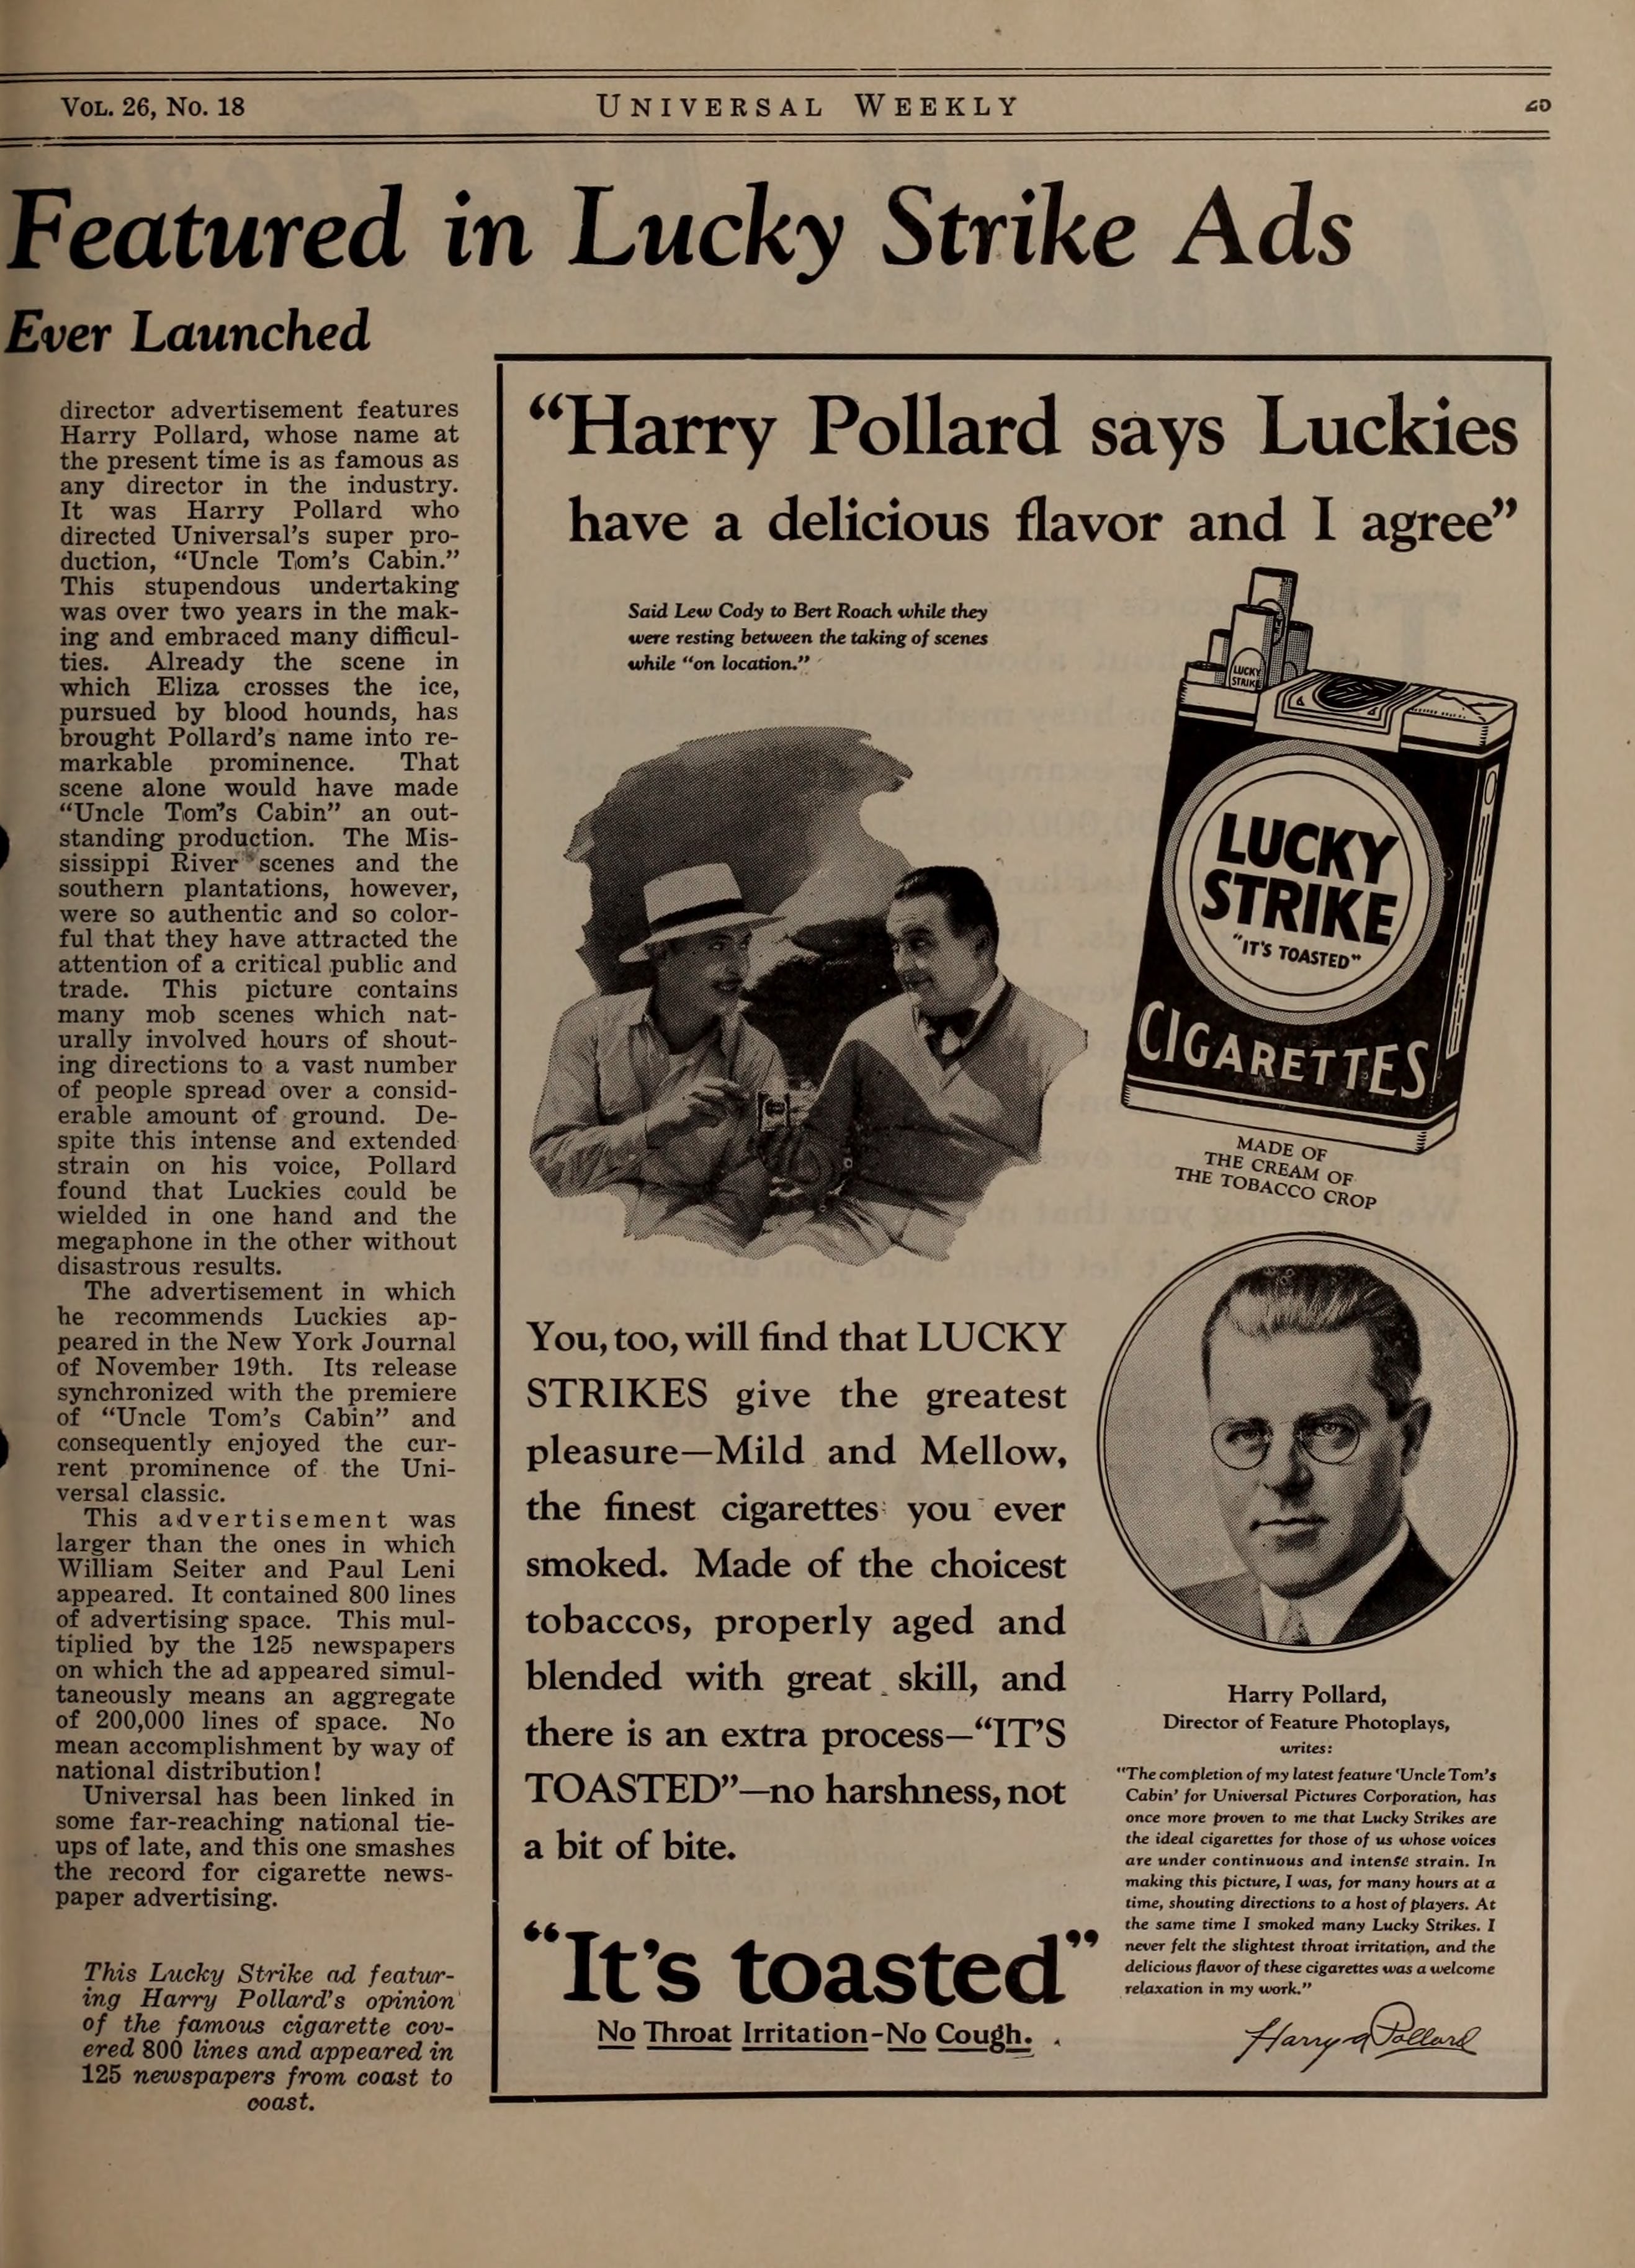 Lucky Strike Advertisements featuring Movie Directors Paul Leni, William Seiter and Harry Pollard | www.vintoz.com